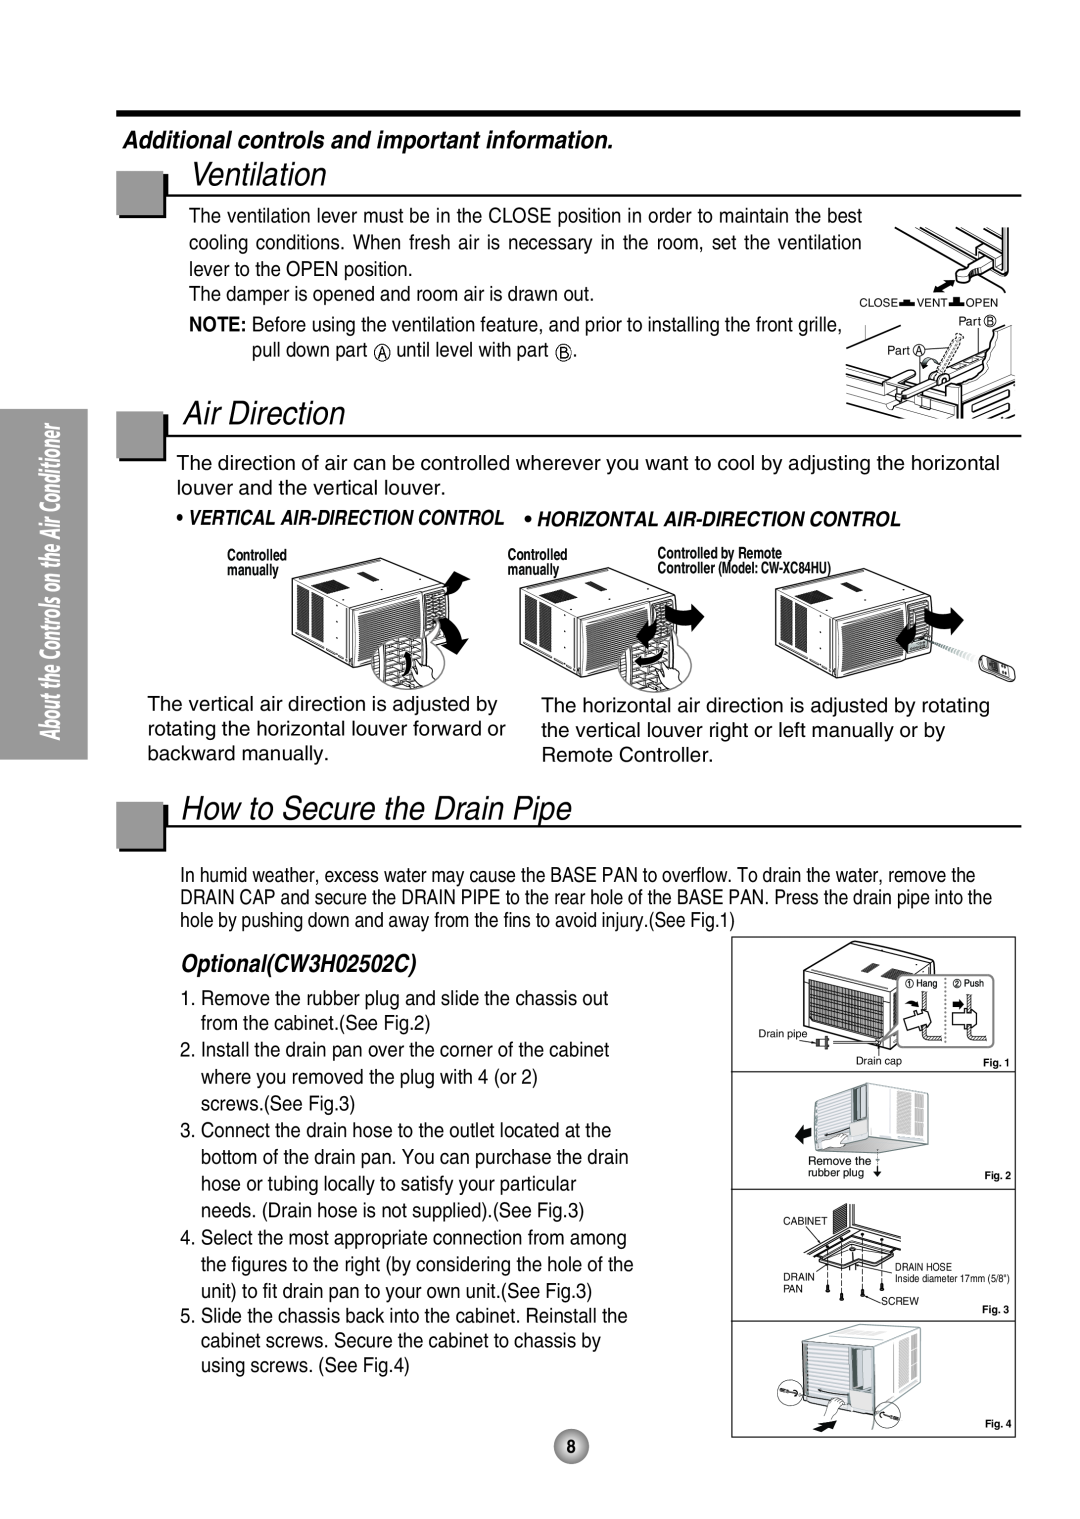 Panasonic CW-XC64HU manual Ventilation, Air Direction, How to Secure the Drain Pipe, OptionalCW3H02502C 